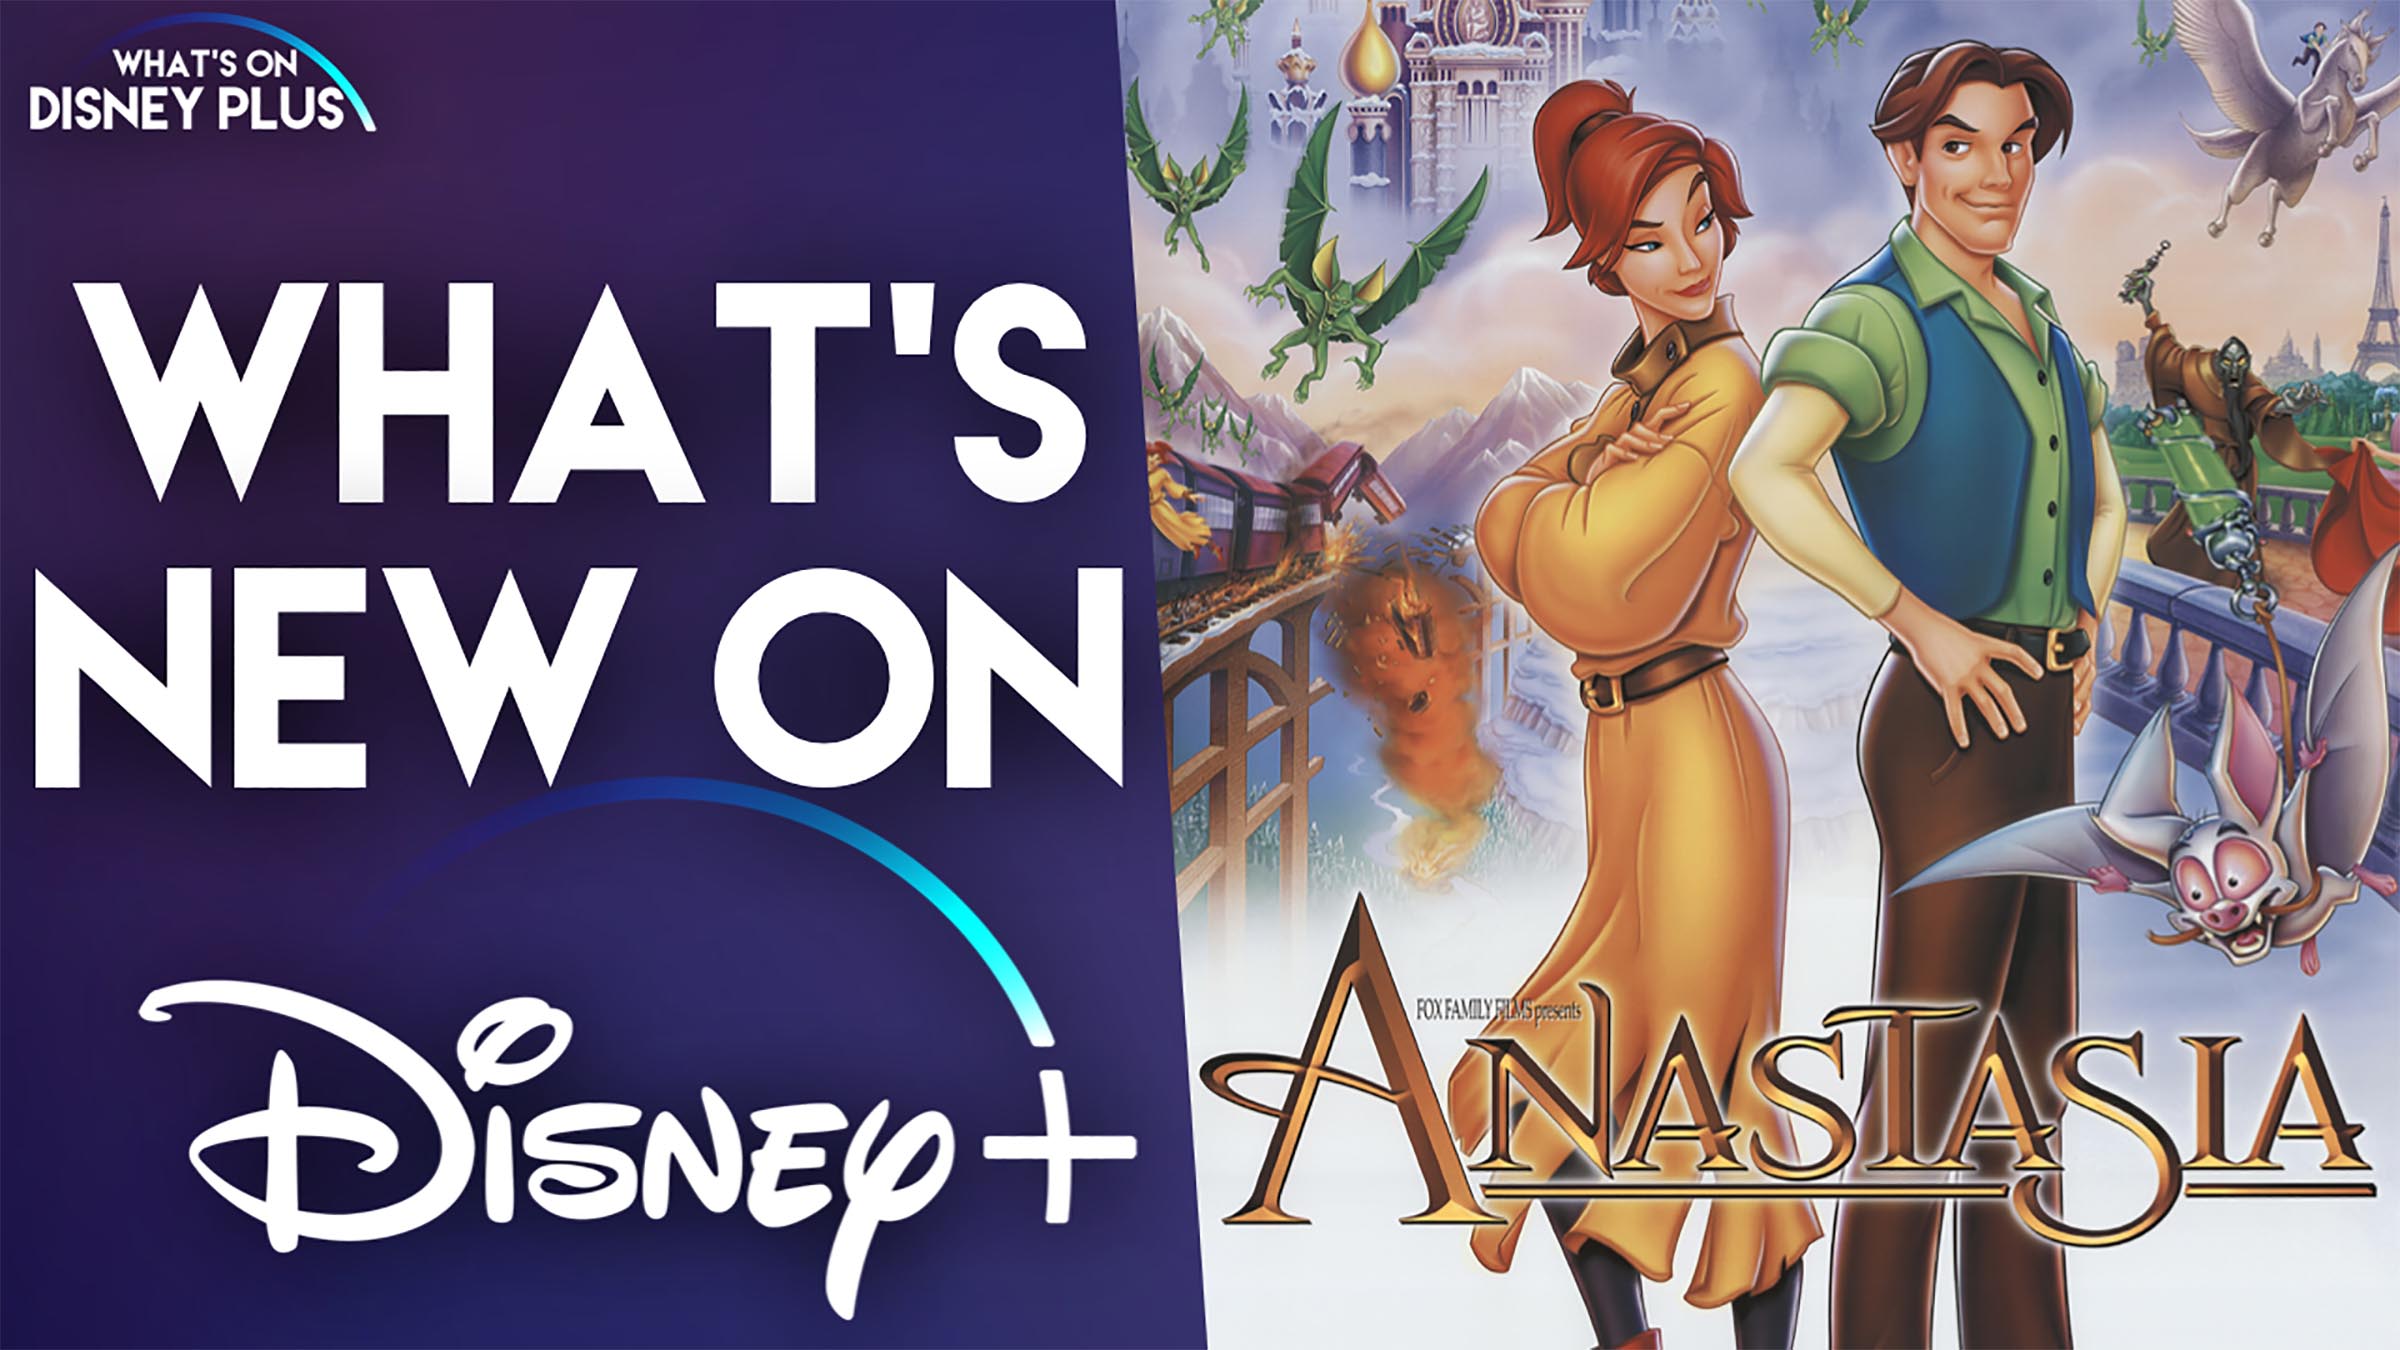 Disney recently bought 20th Century Fox along with it's entire catalog of movies. Is 'Anastasia' now a Disney princess?